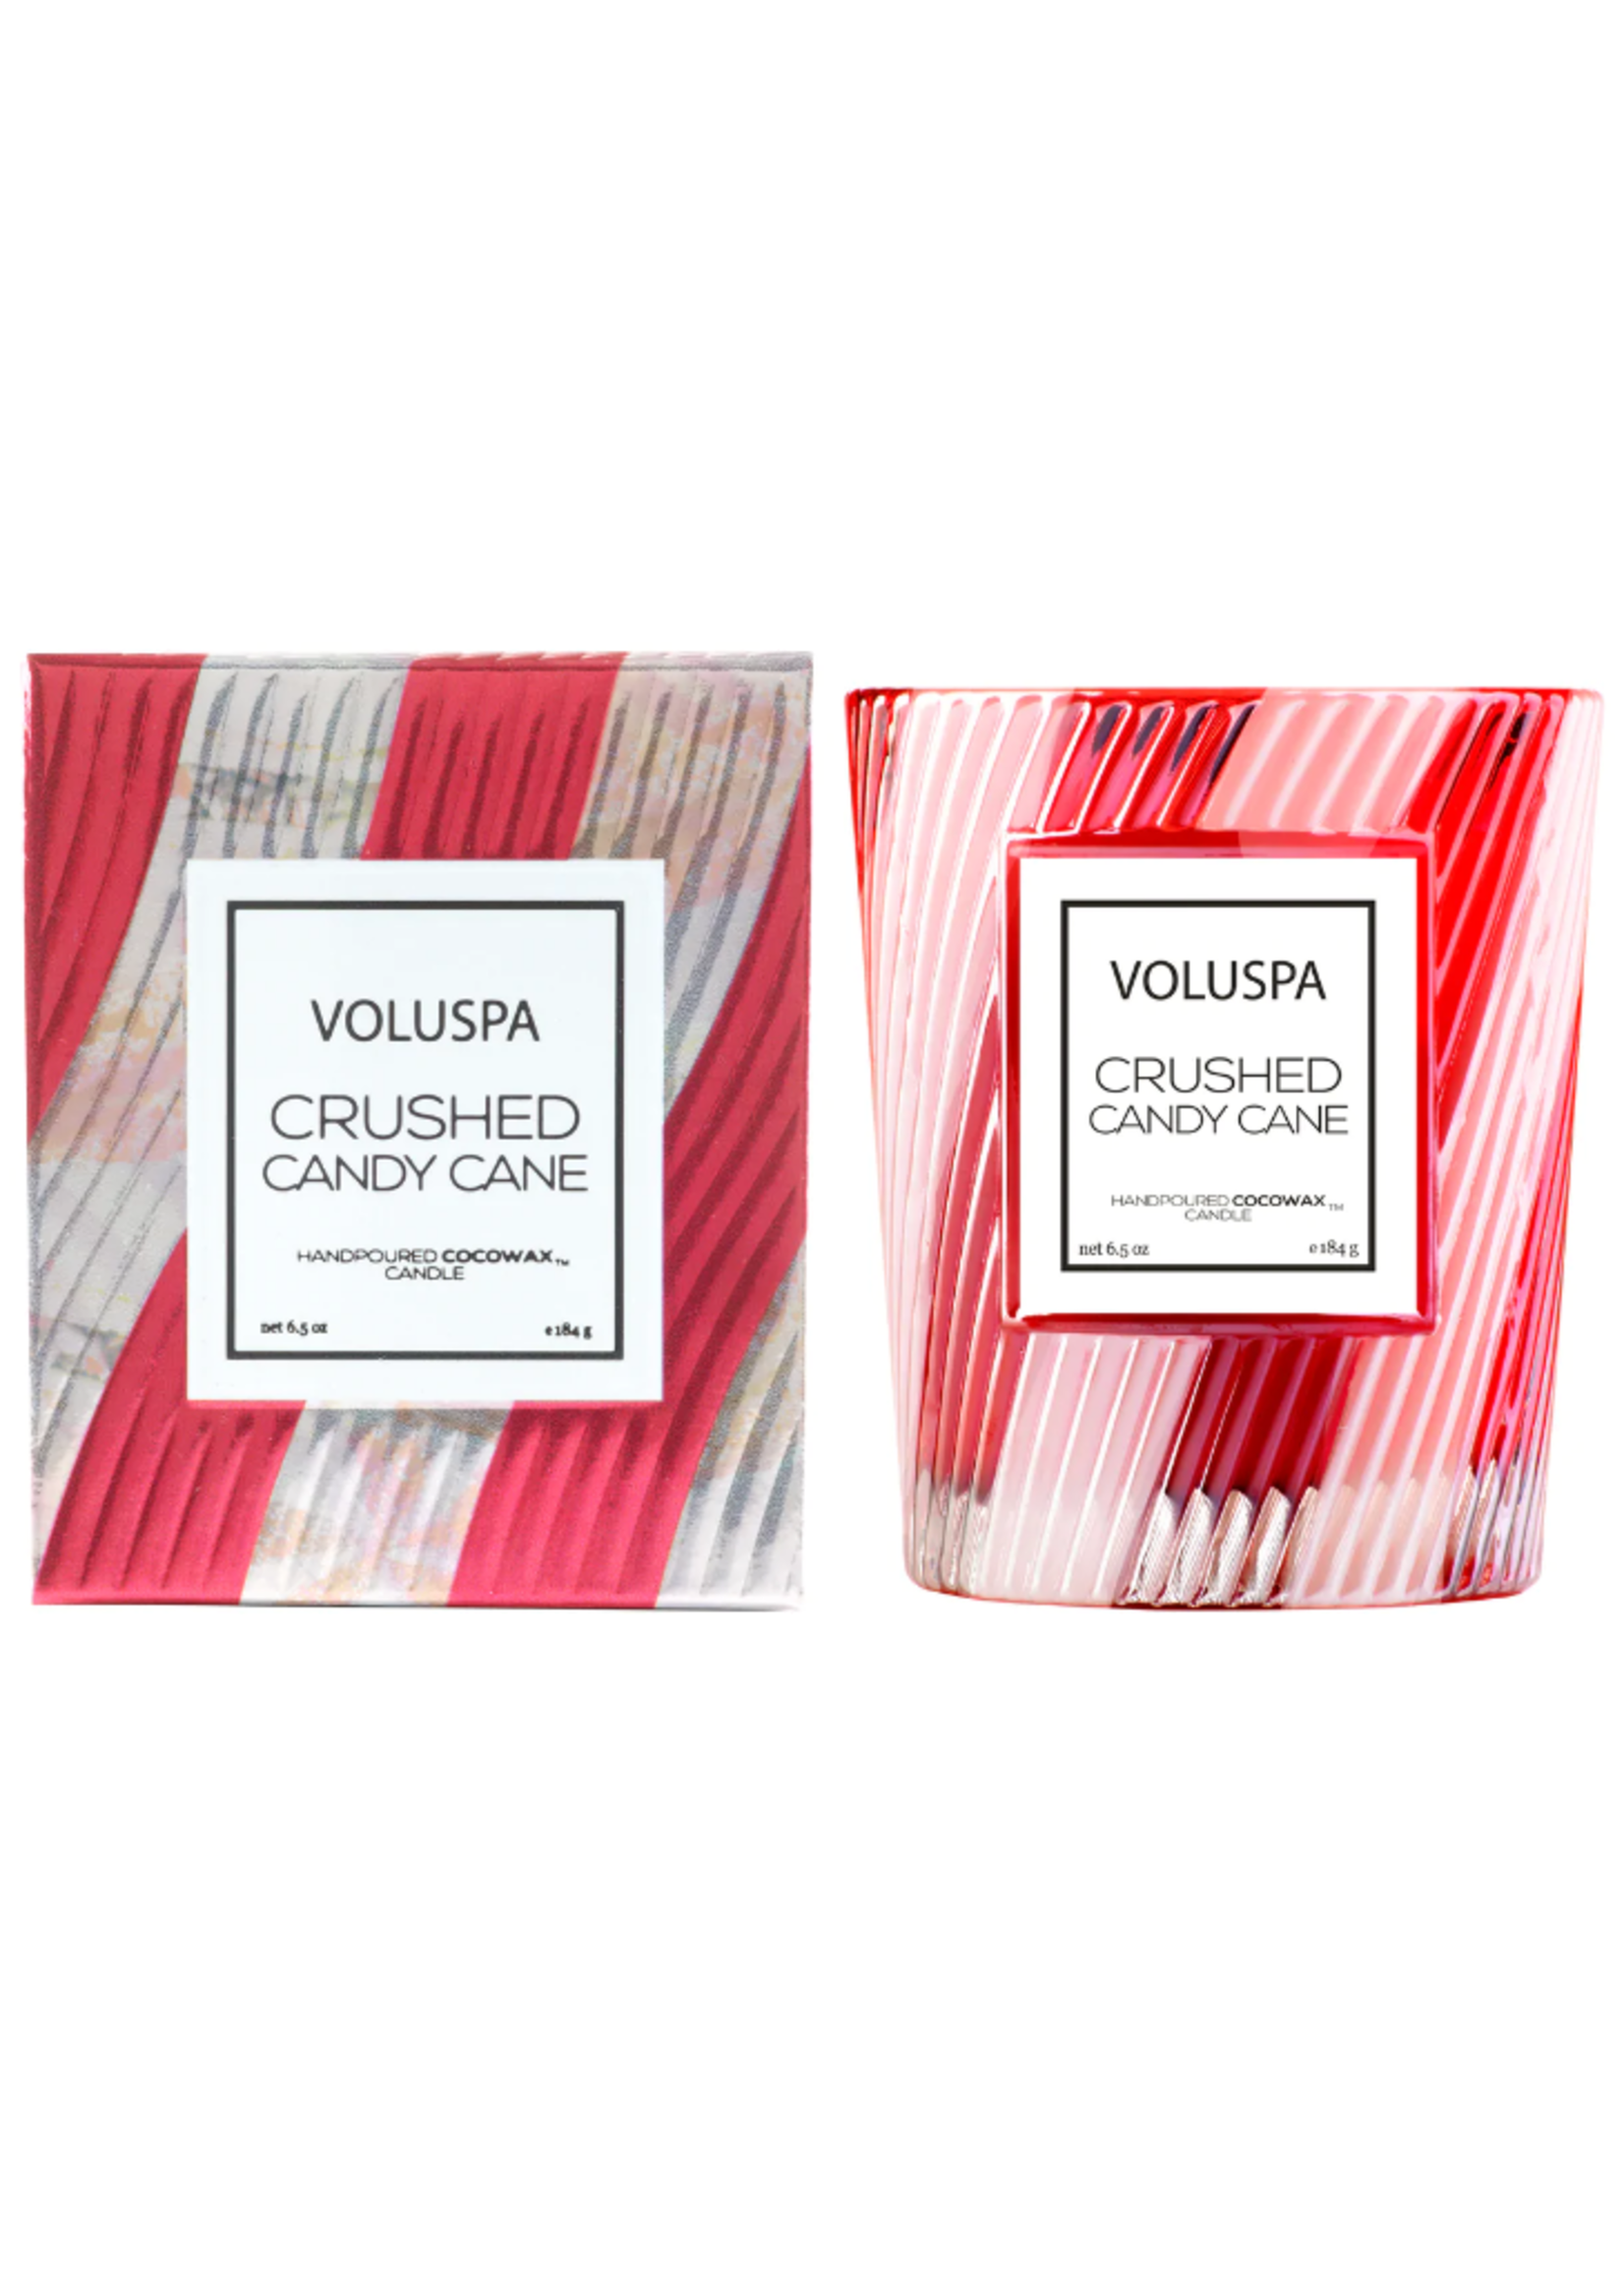 Voluspa Crushed Candy Cane Classic Boxed Candle 6.5oz